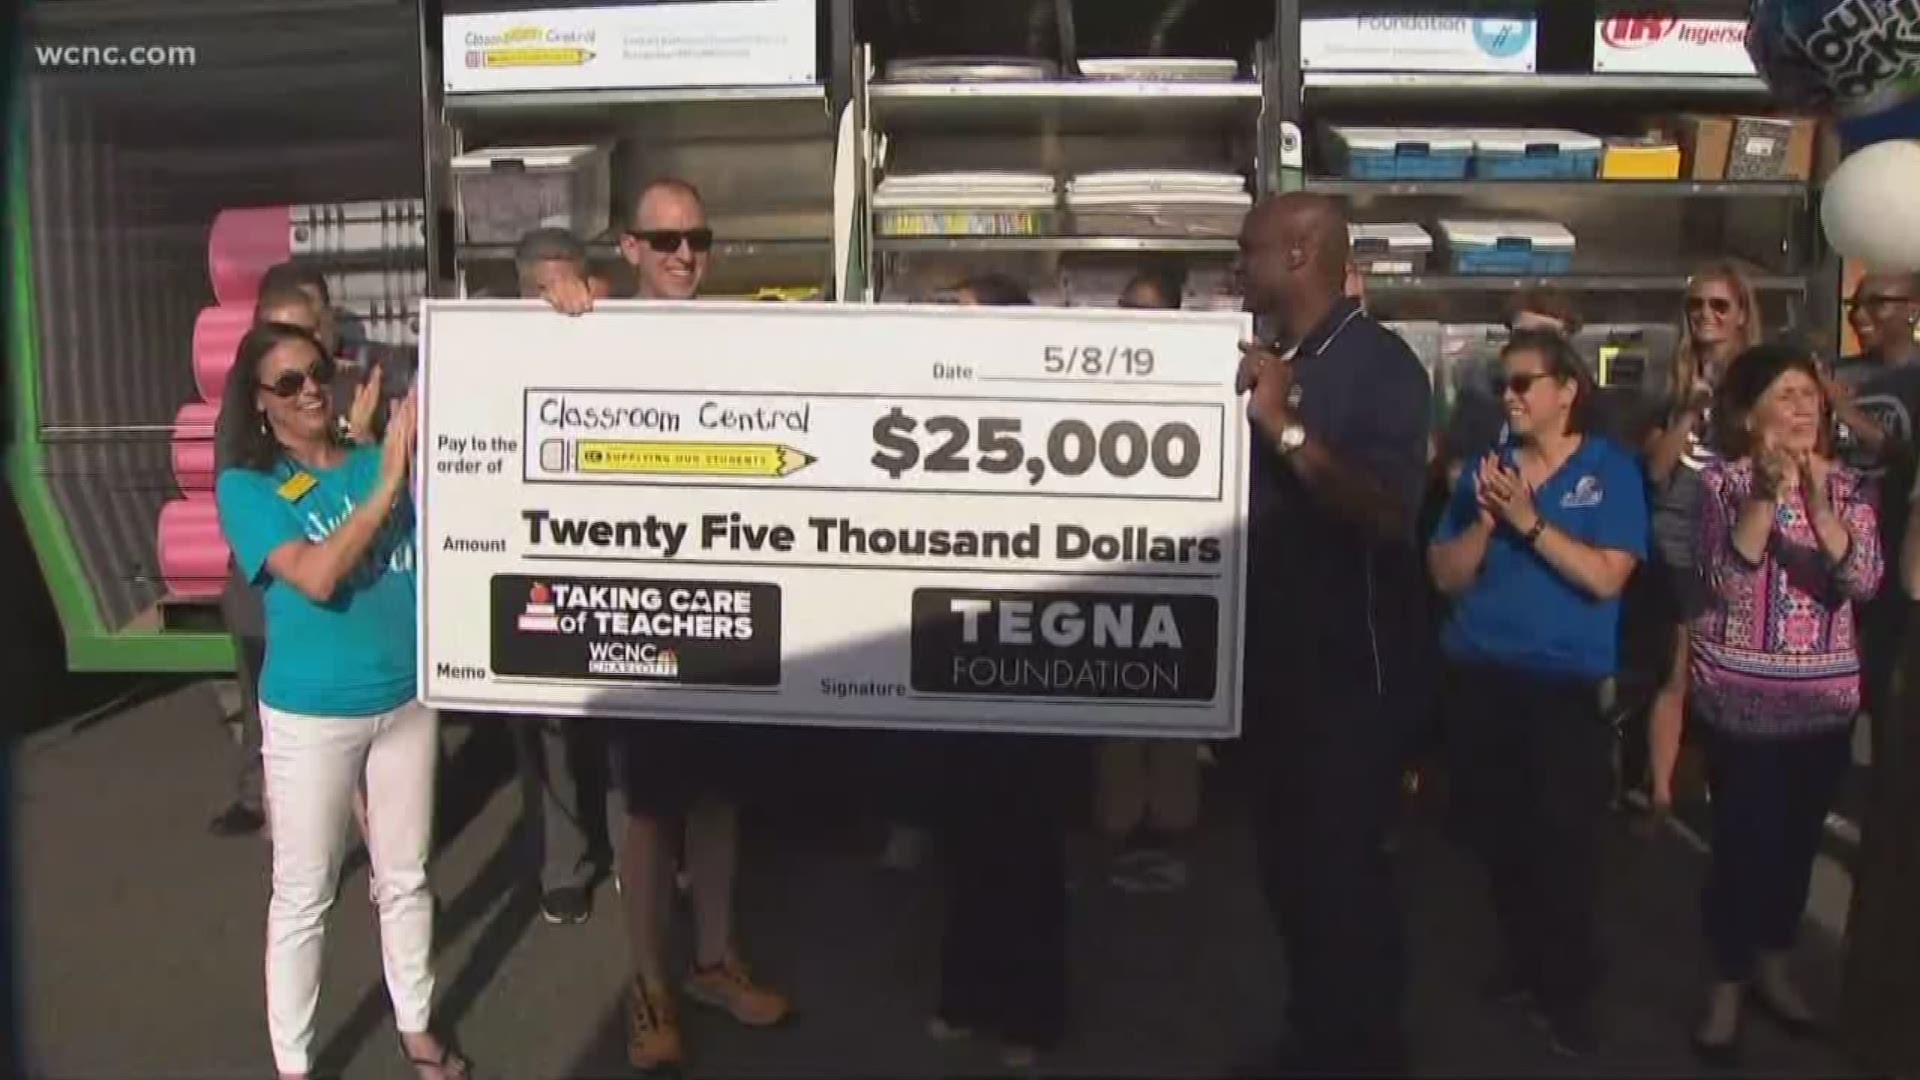 On behalf of the TEGNA Foundation, WCNC presented Classroom Central with a $25,000 check to help get school supplies to students.